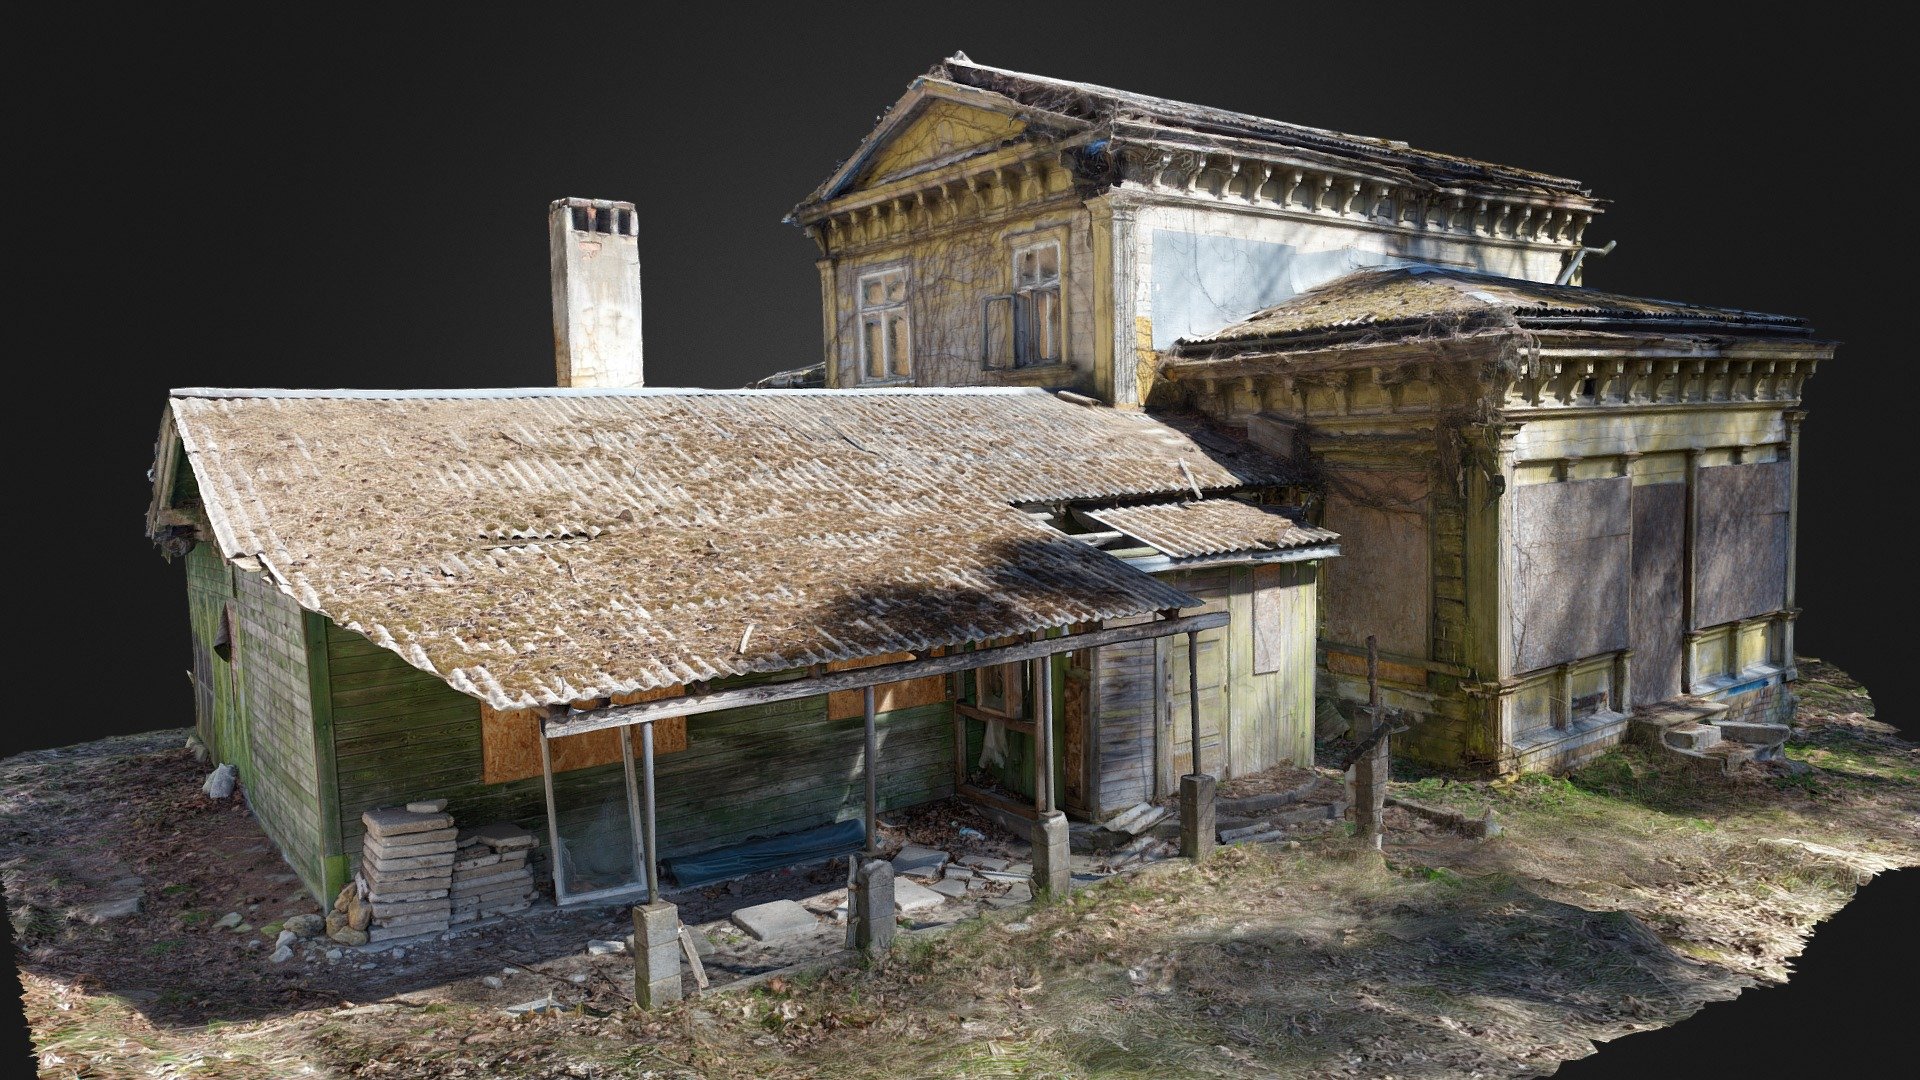 3D scan of an old abandoned house. Mossy roof, sunny day. 
Boarded up windows. 
Old chimney. 

With normal map 3d model